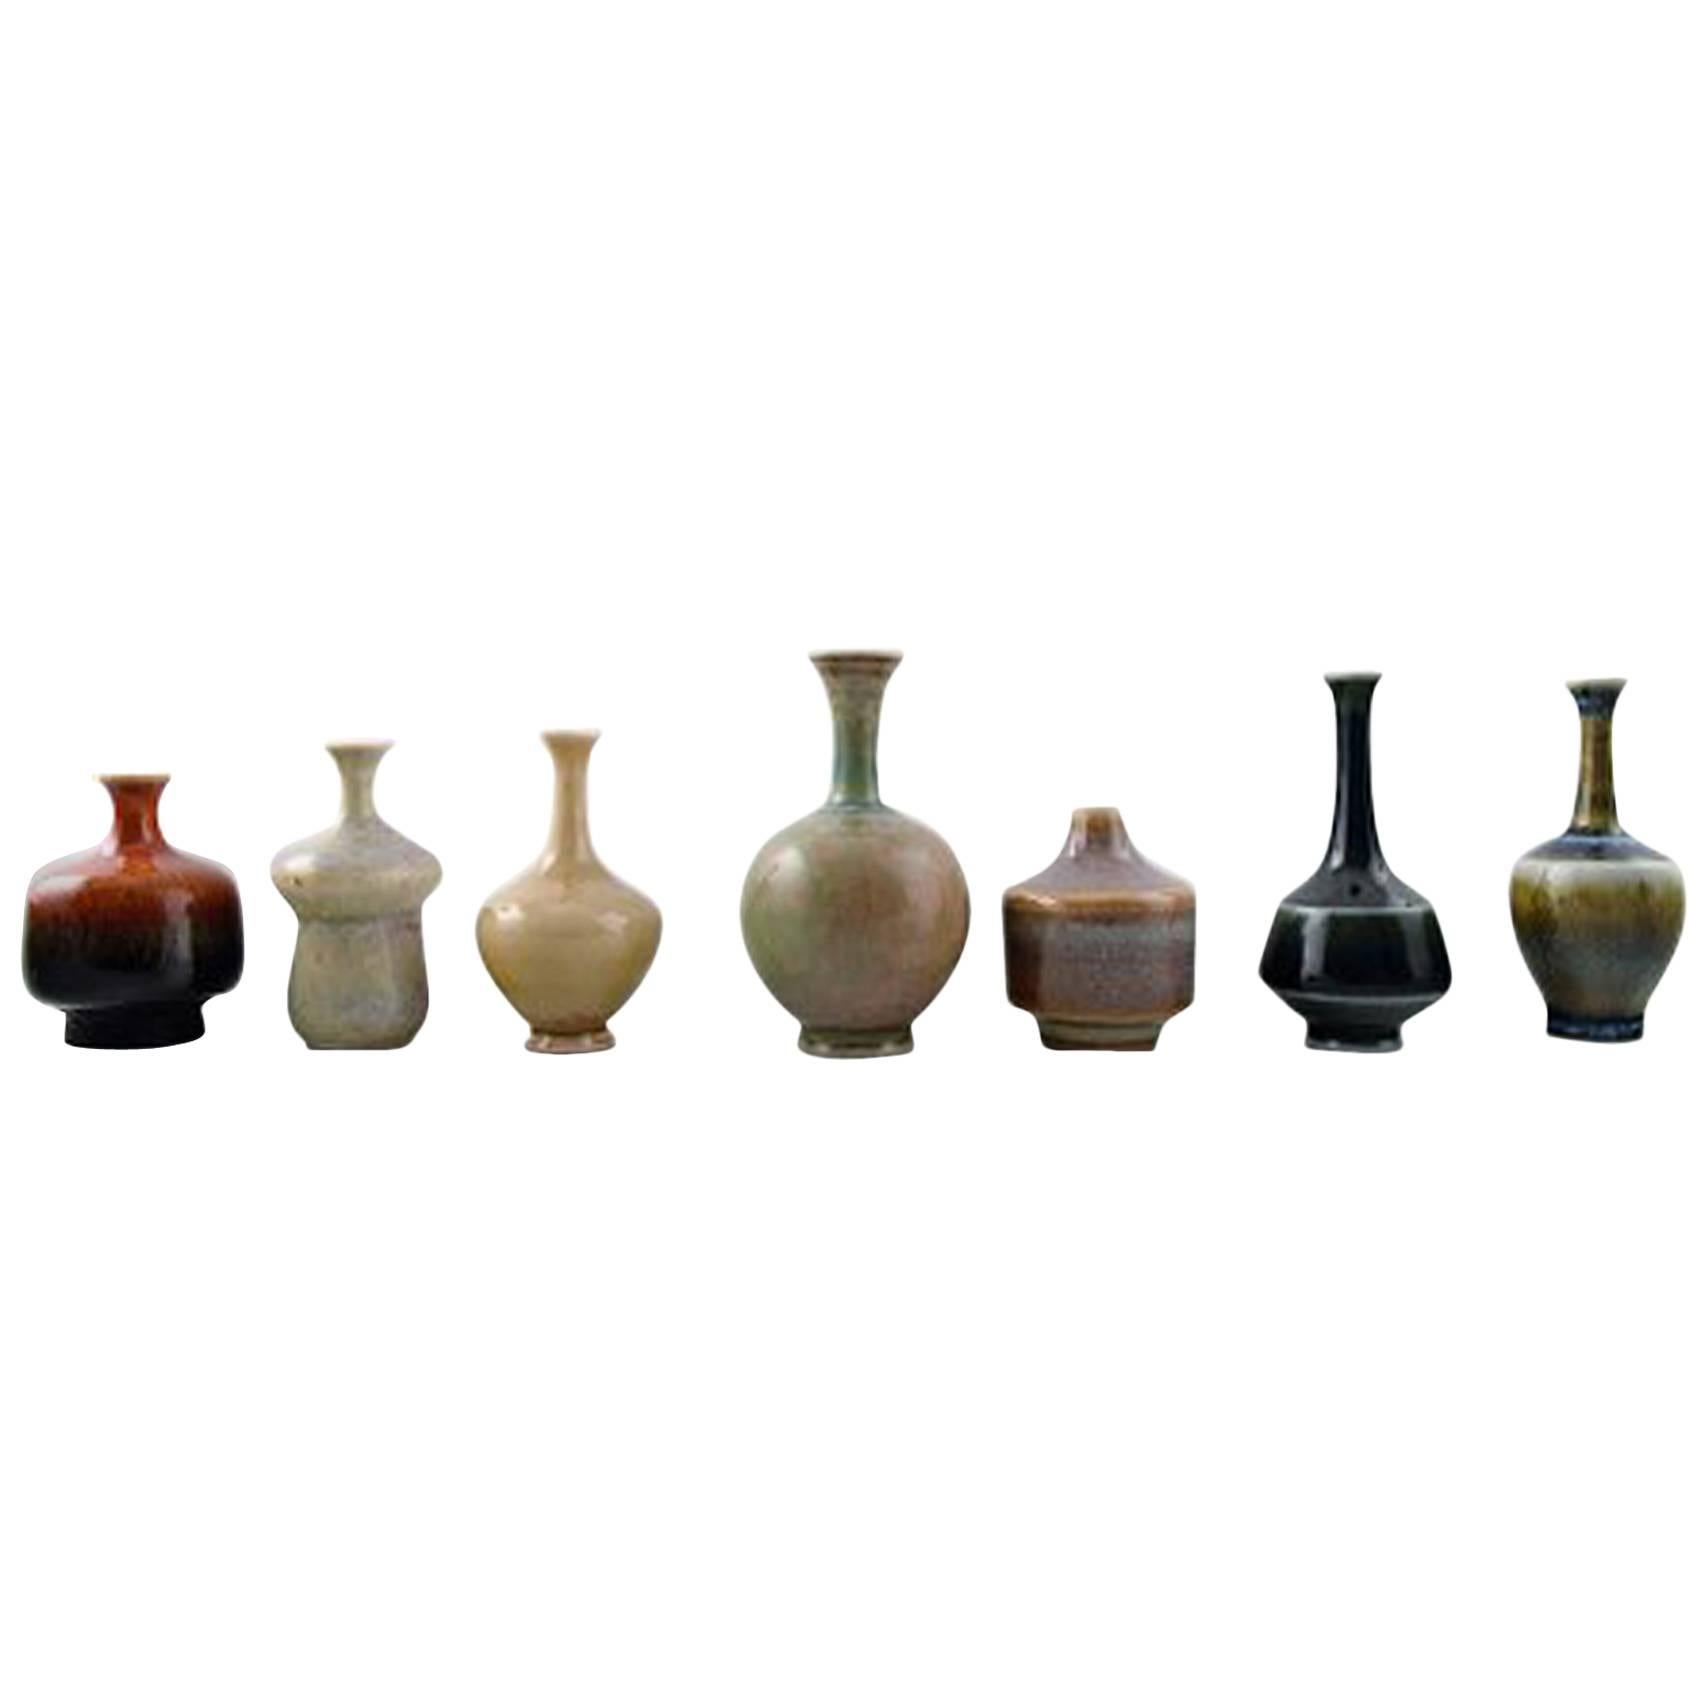 Collection of Höganäs Miniature Vases, a Total of Seven Pieces